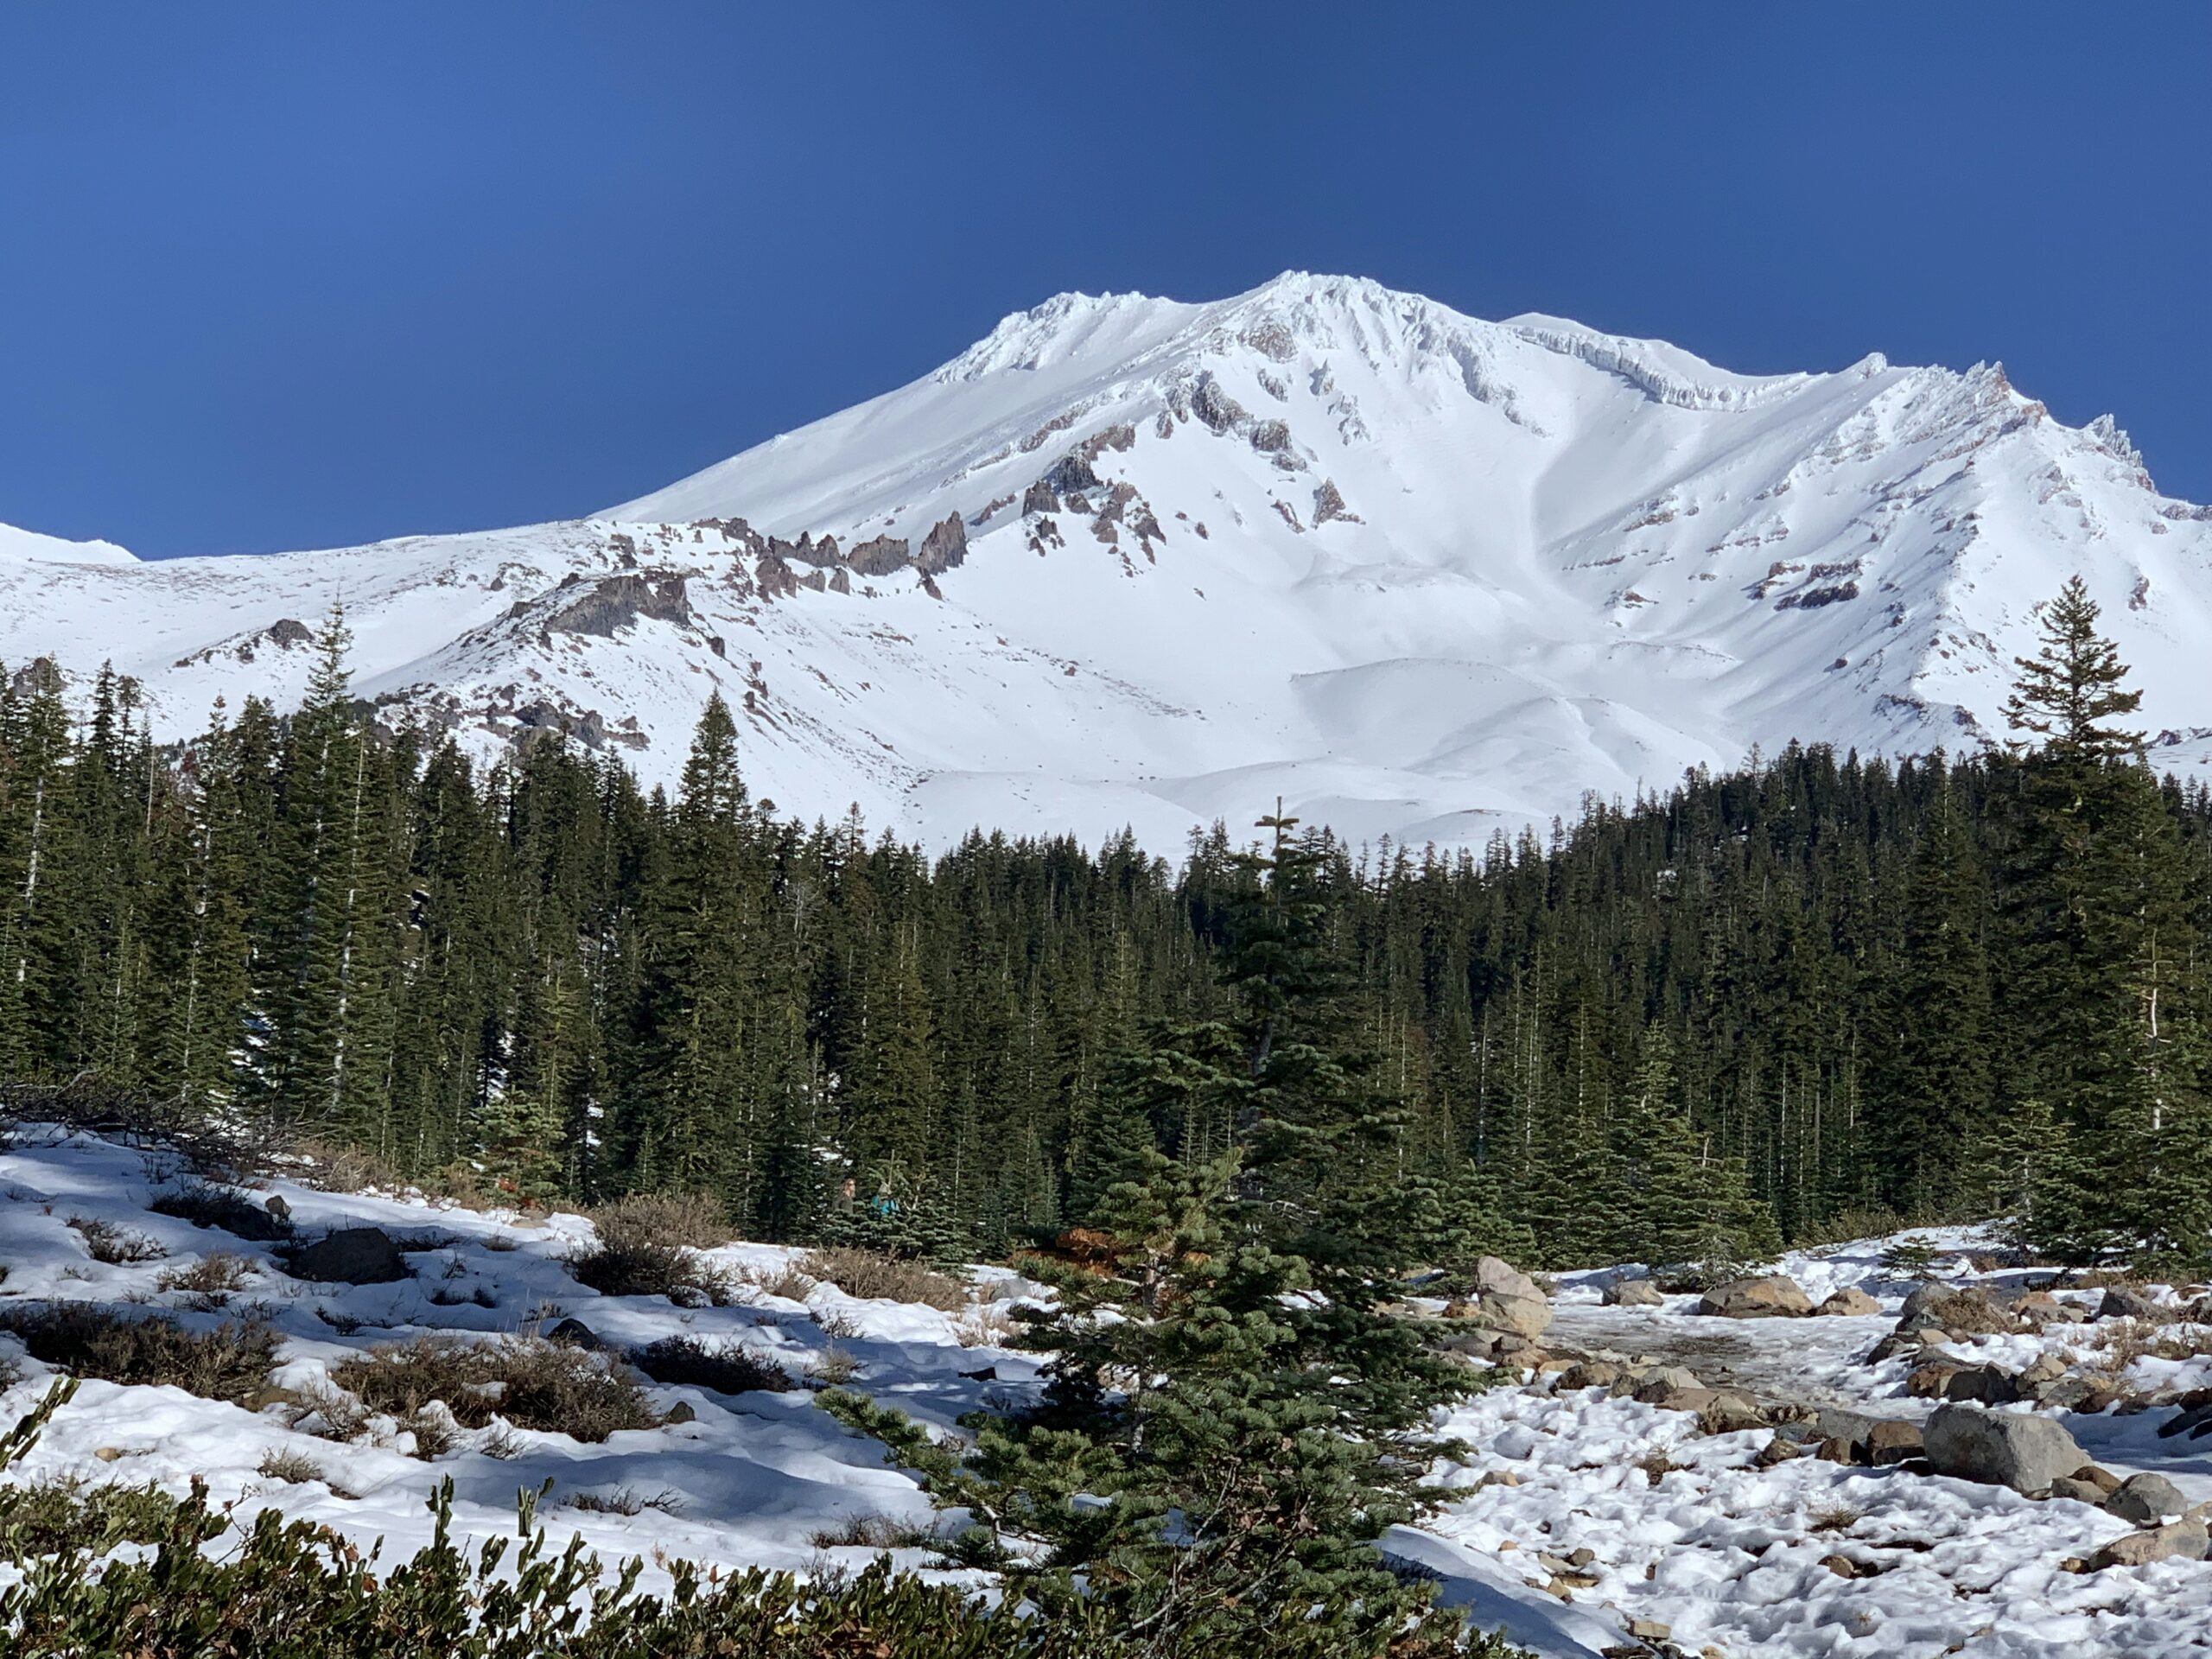 Is Climbing Mount Shasta Suitable For Beginners?